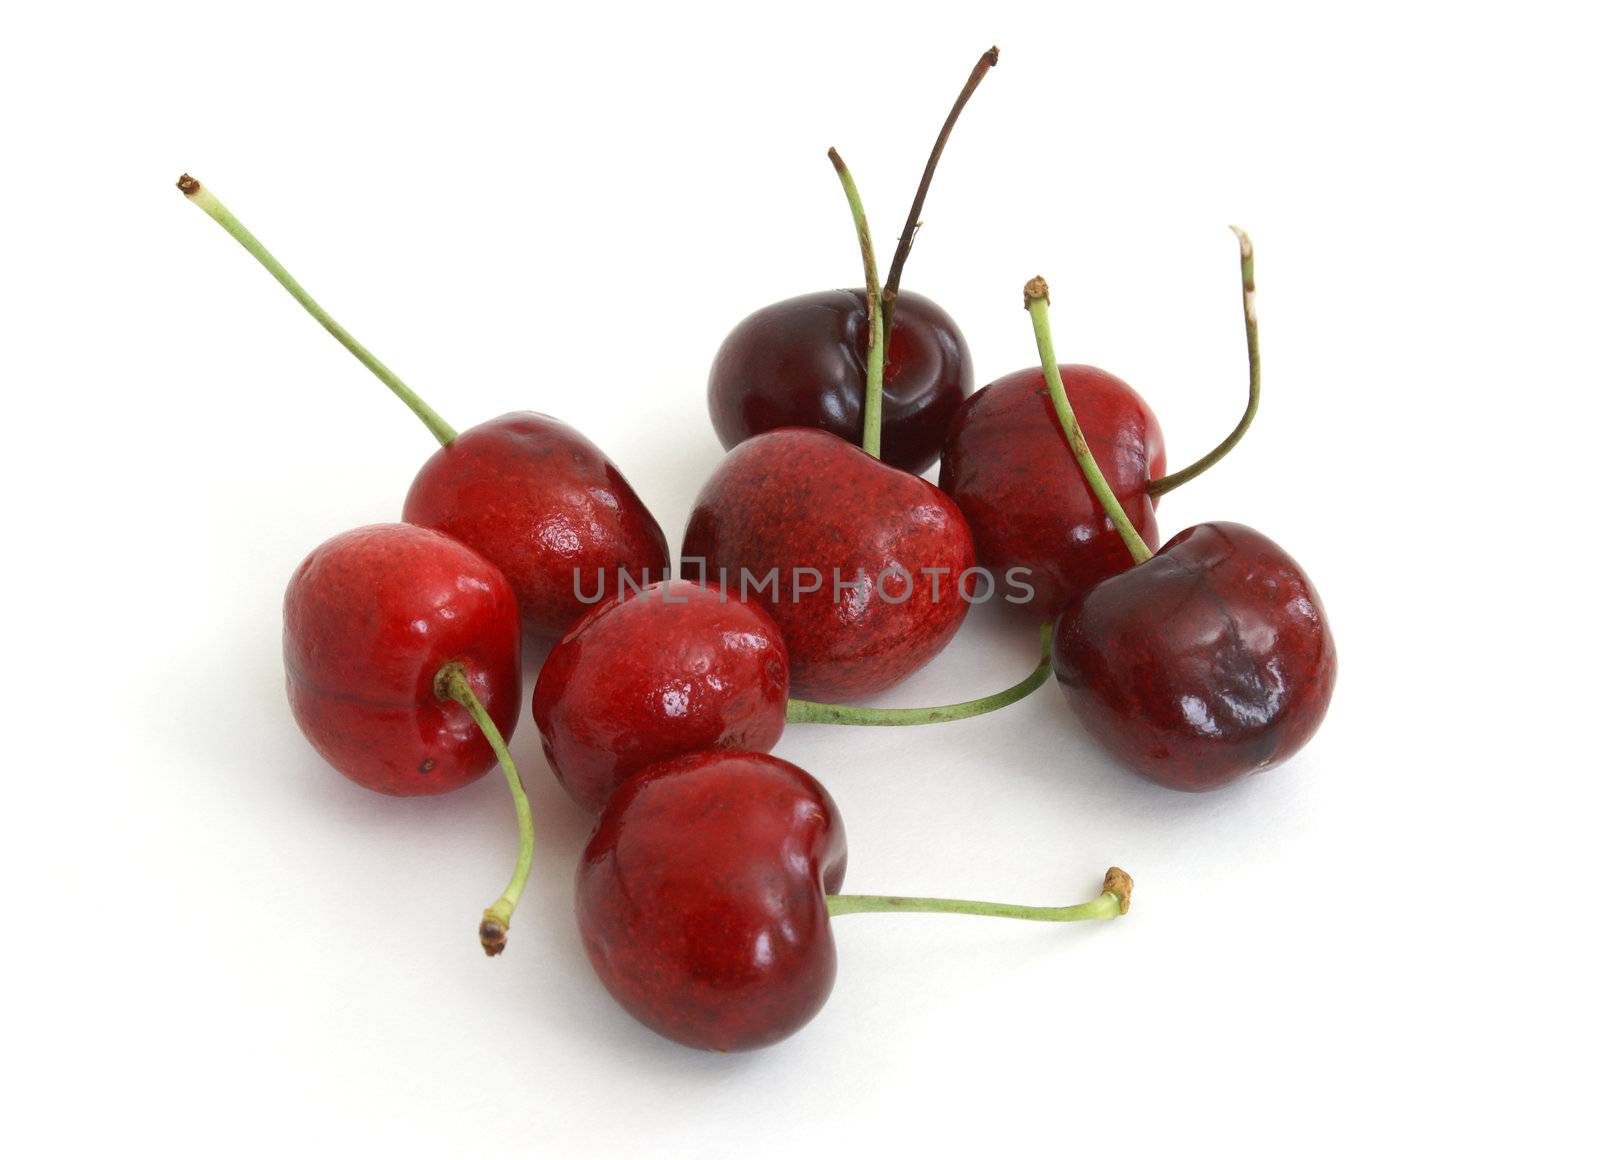 A cluster of ripe cherries on white background.